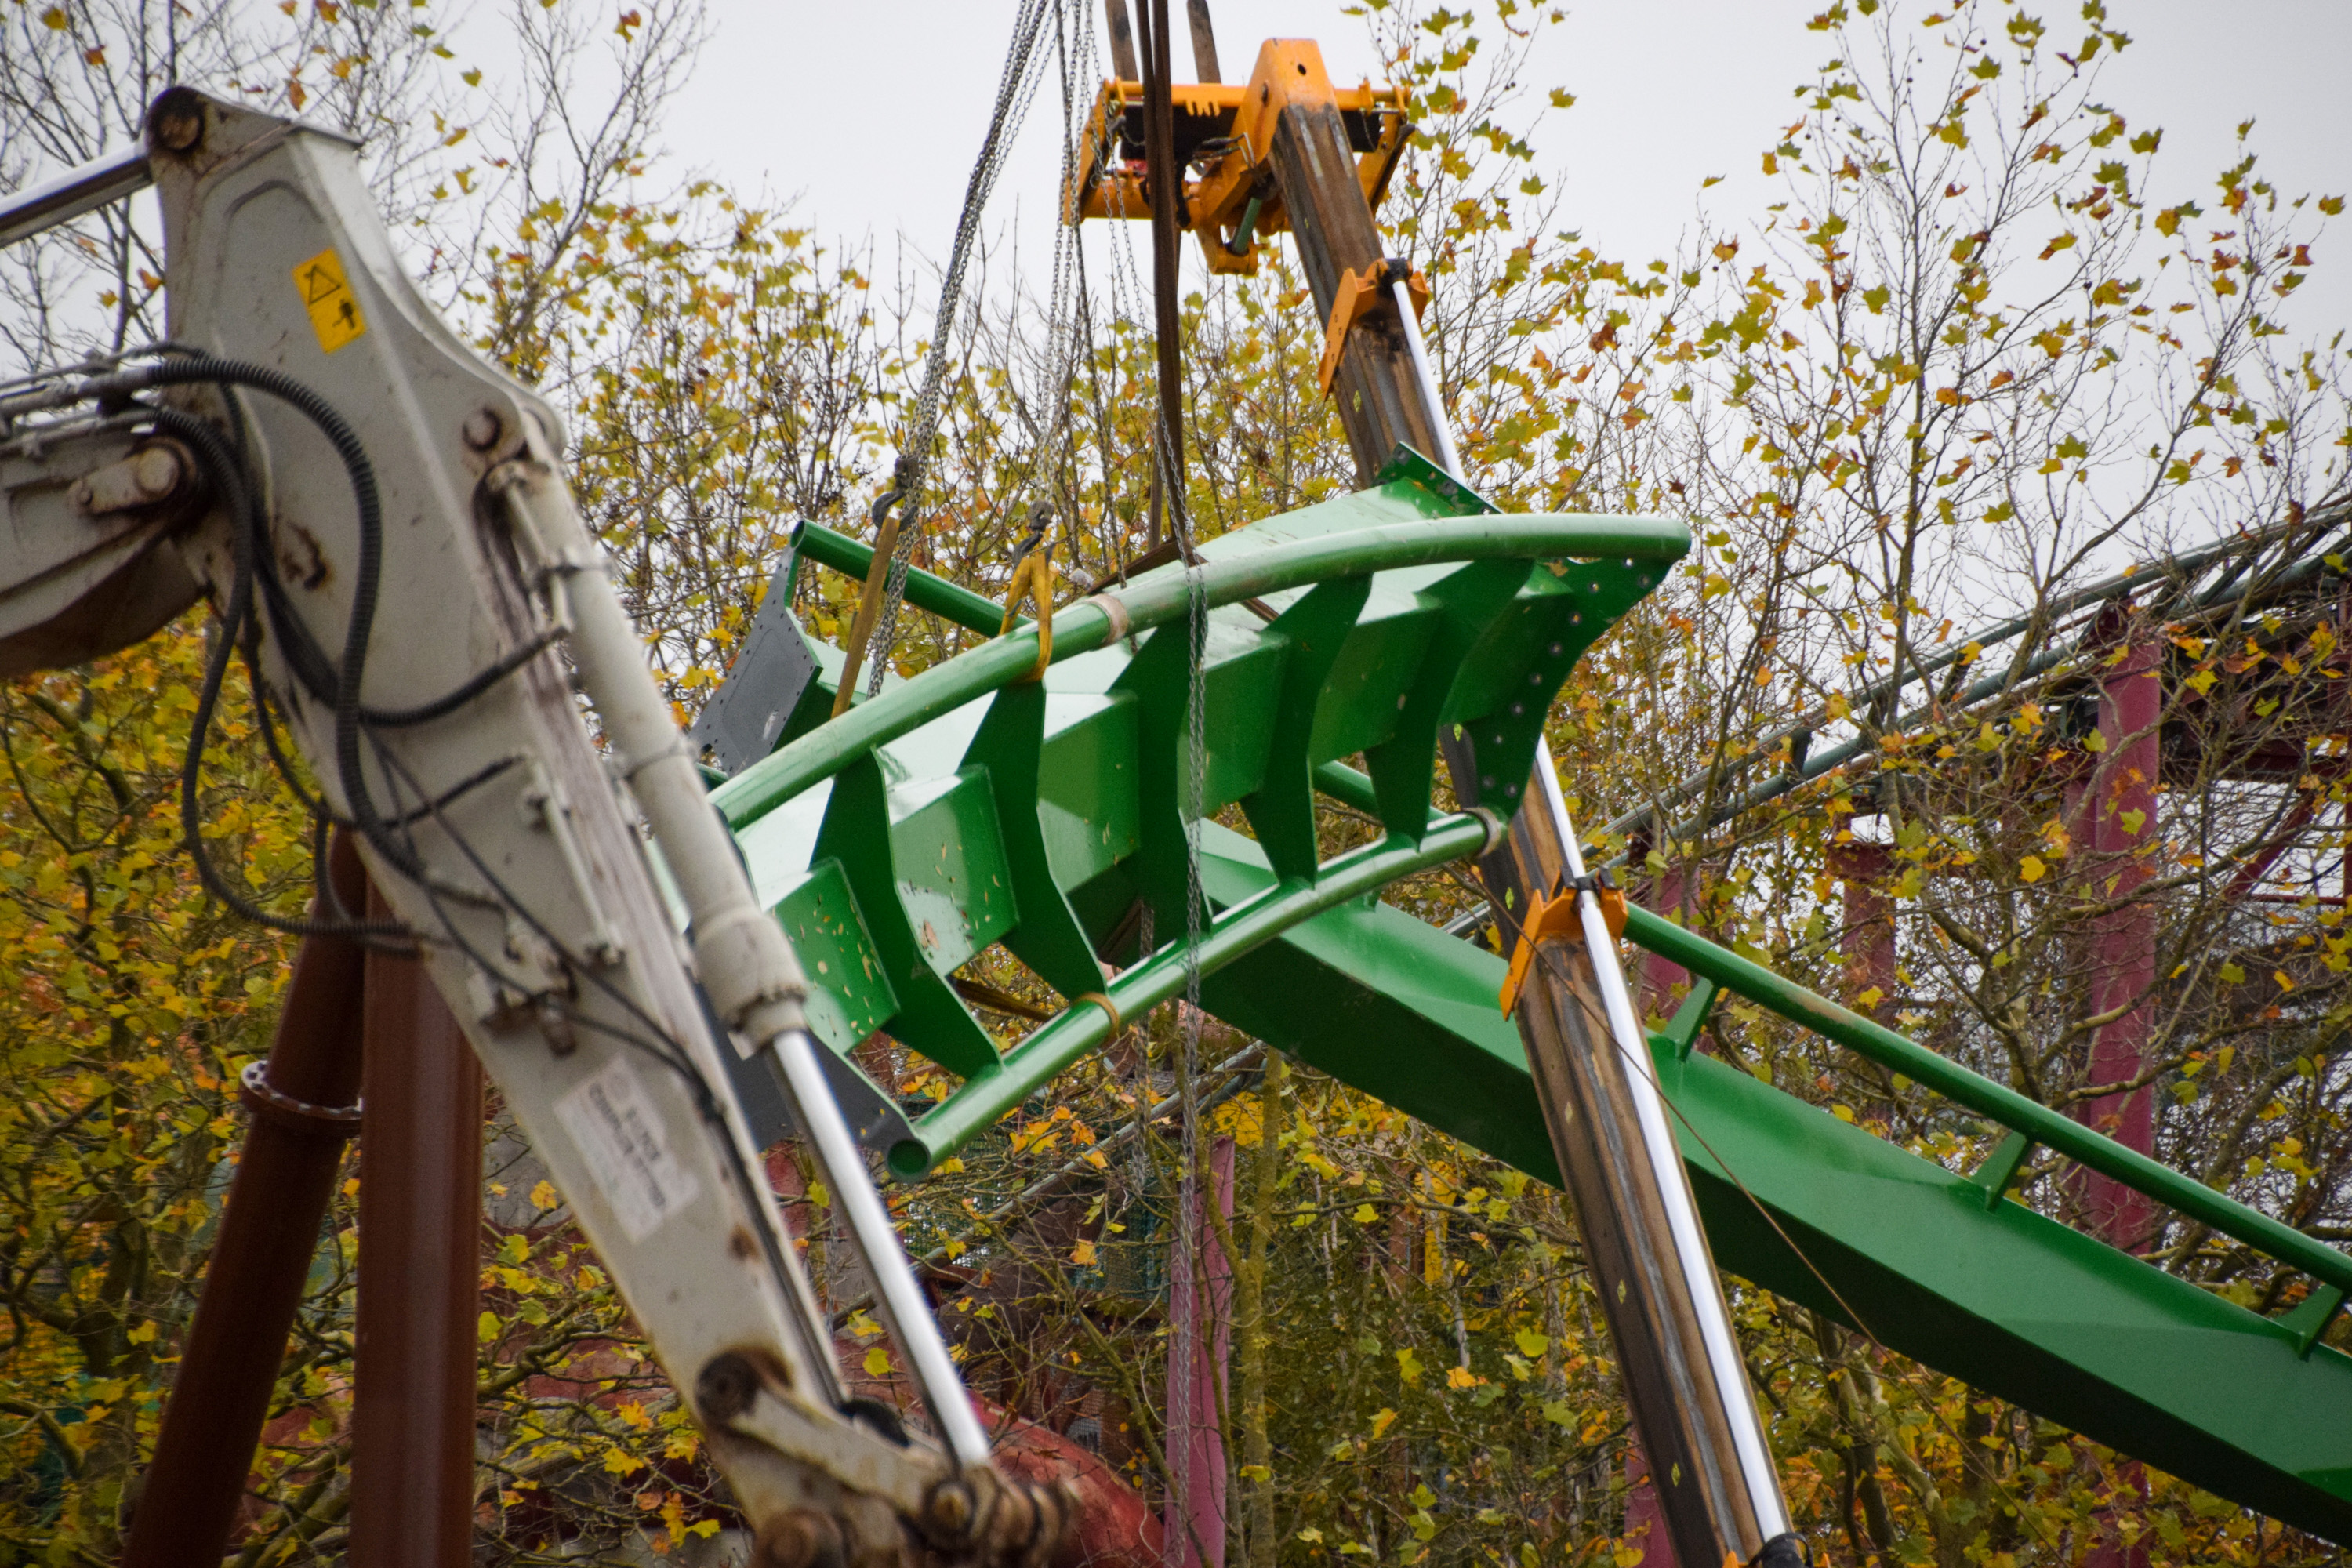 Sections Of Track For Jumanji Rollercoaster Installed